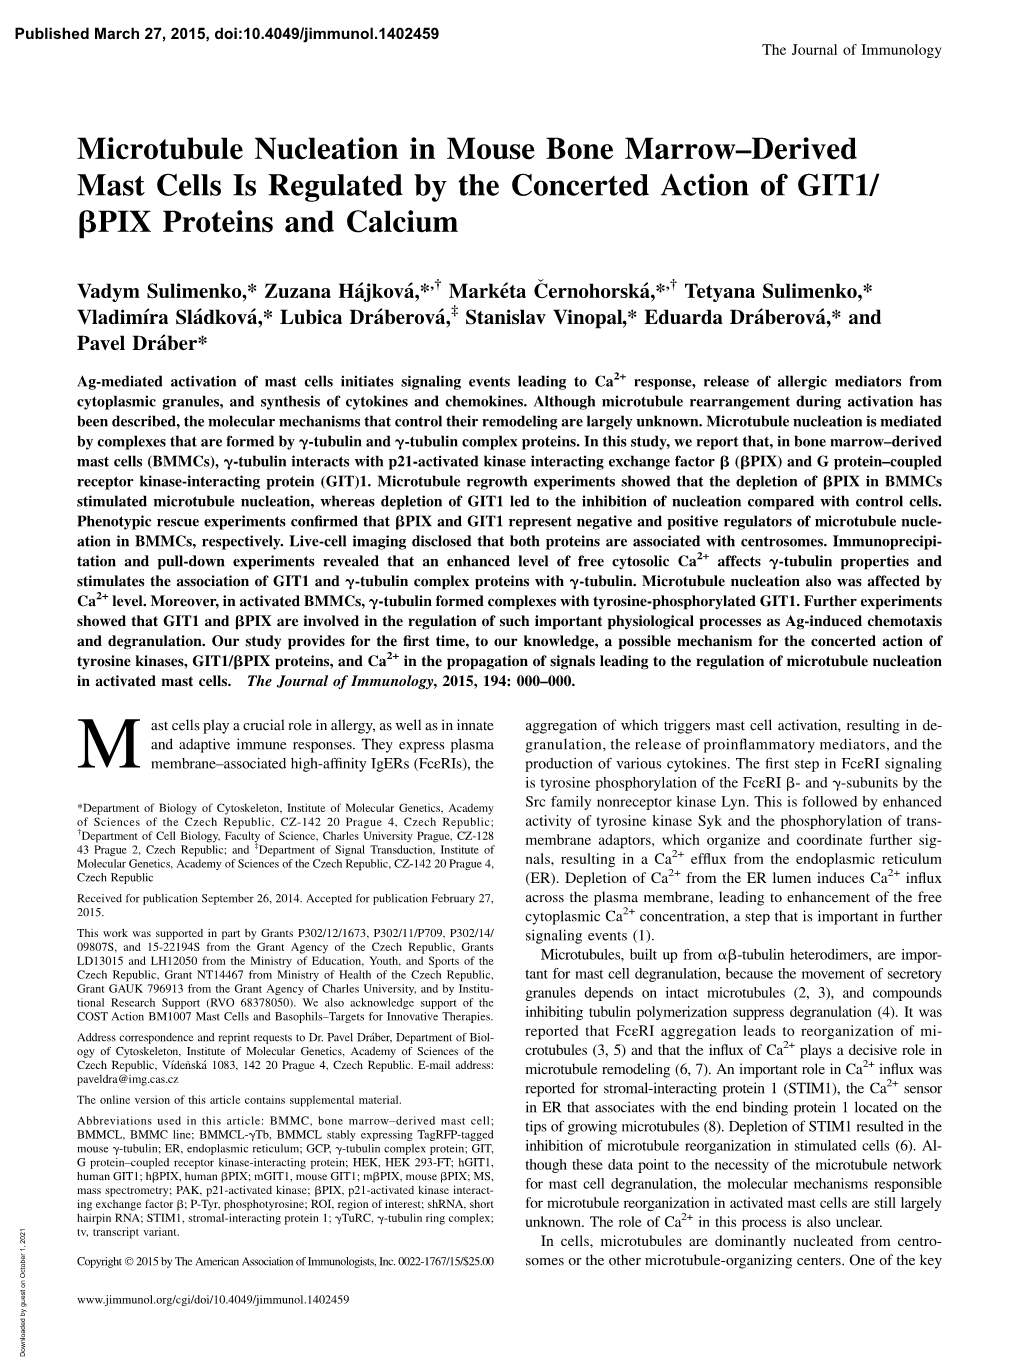 And Calcium PIX Proteins Β the Concerted Action of GIT1/ Derived Mast Cells Is Regulated by − Marrow Microtubule Nucleation I